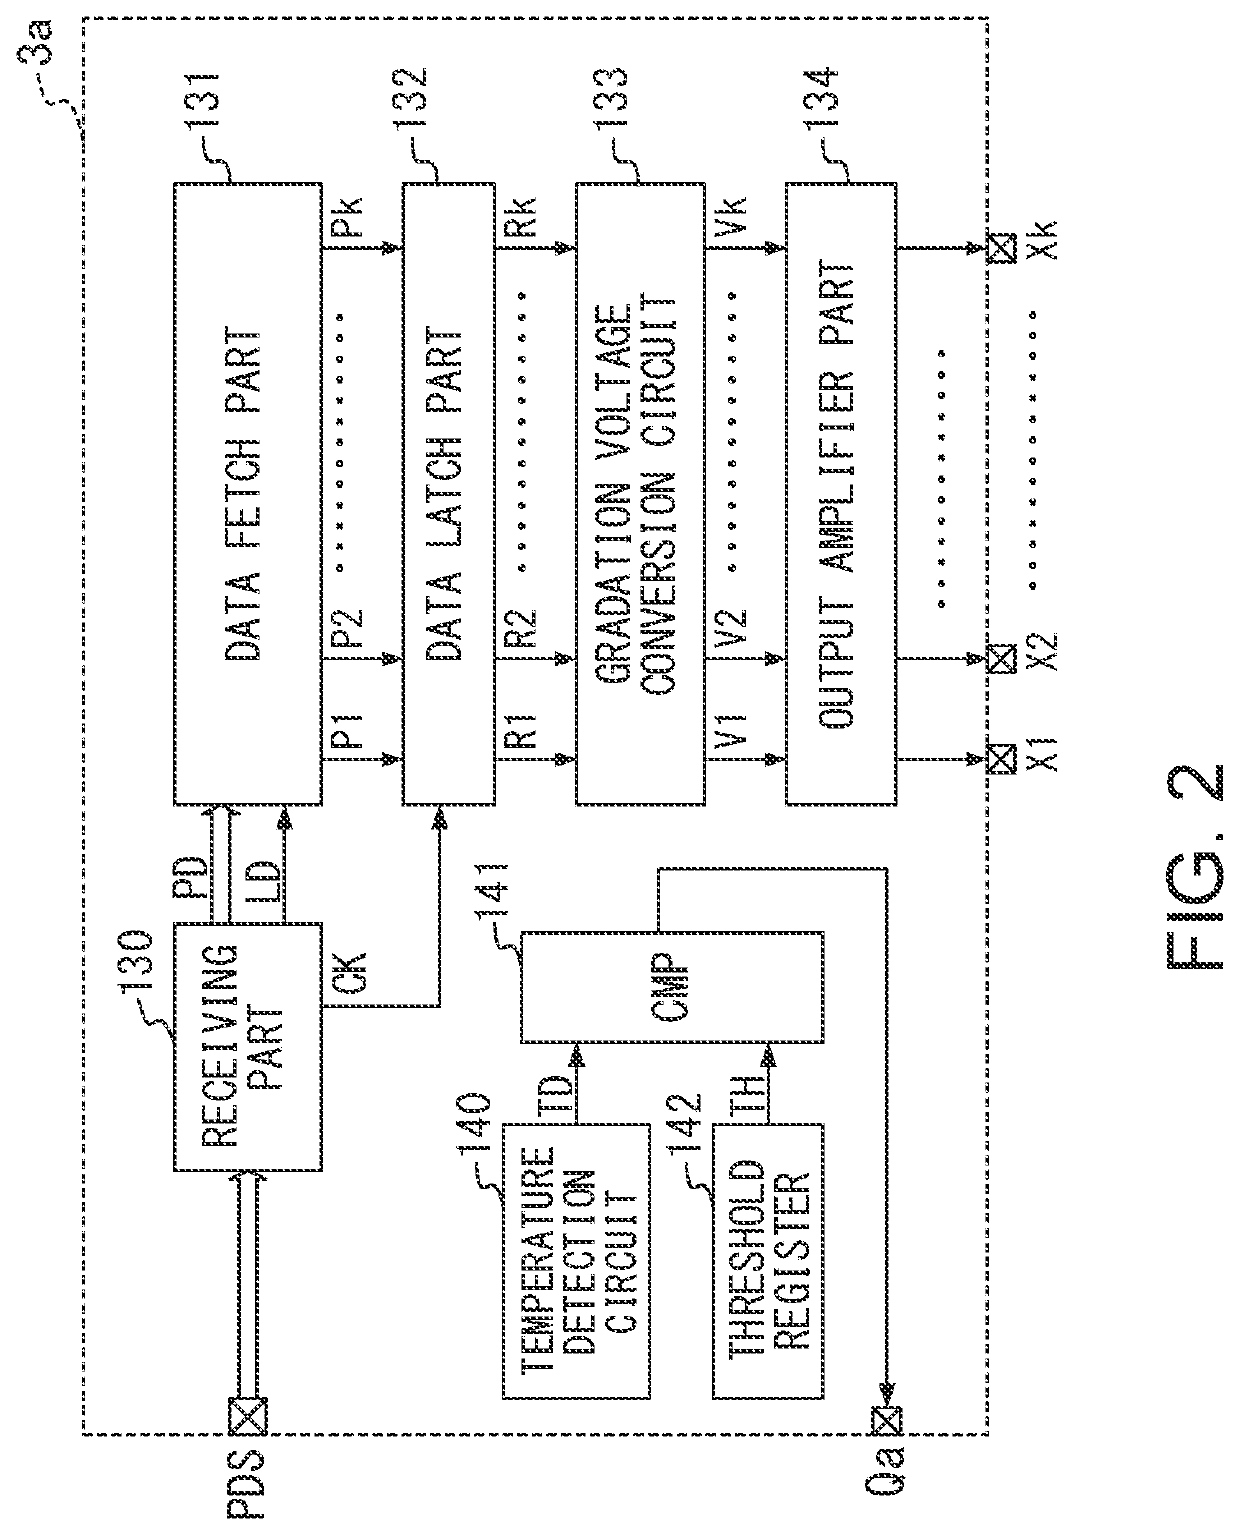 Display driver and display device